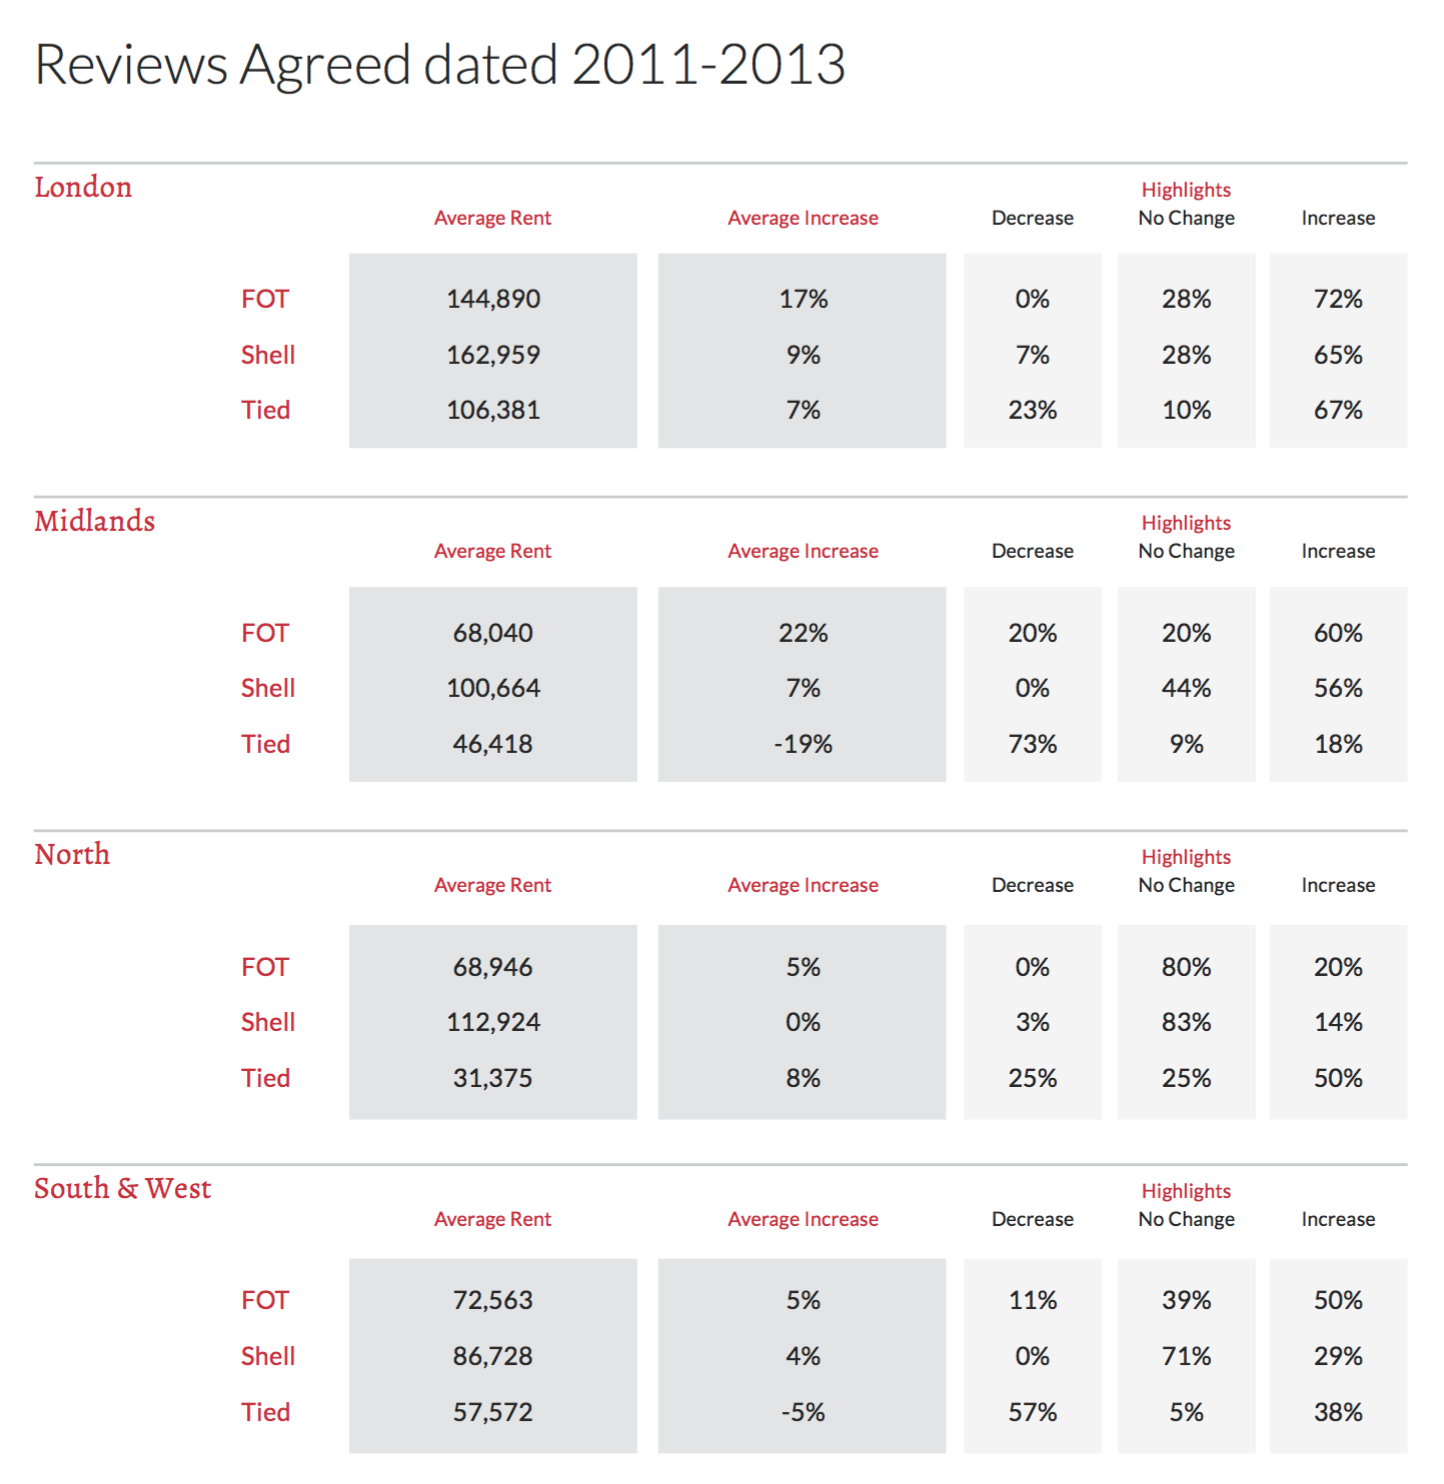 Reviews Agreed Dated 2011-2013